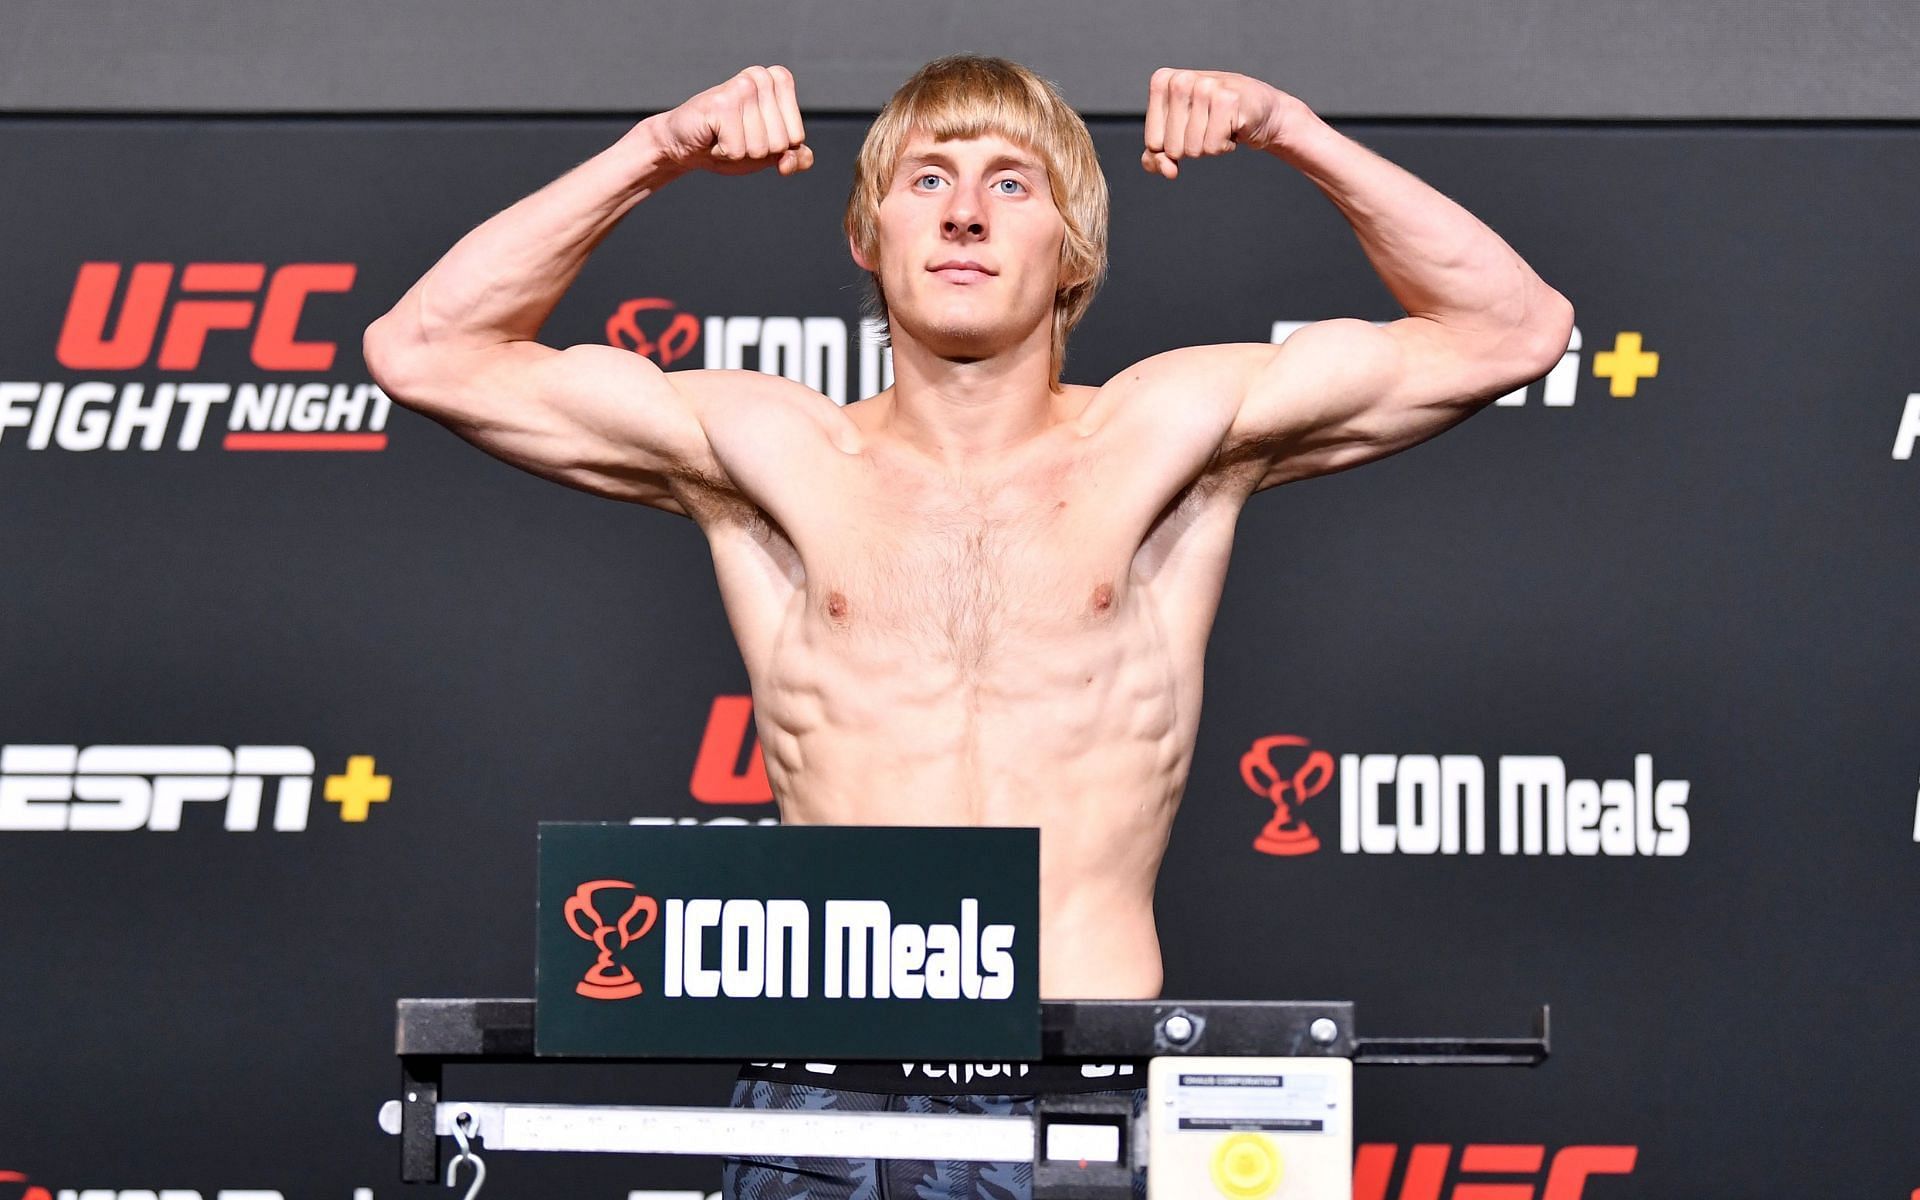 English mixed martial artist Paddy Pimblett at his debut UFC weigh-in